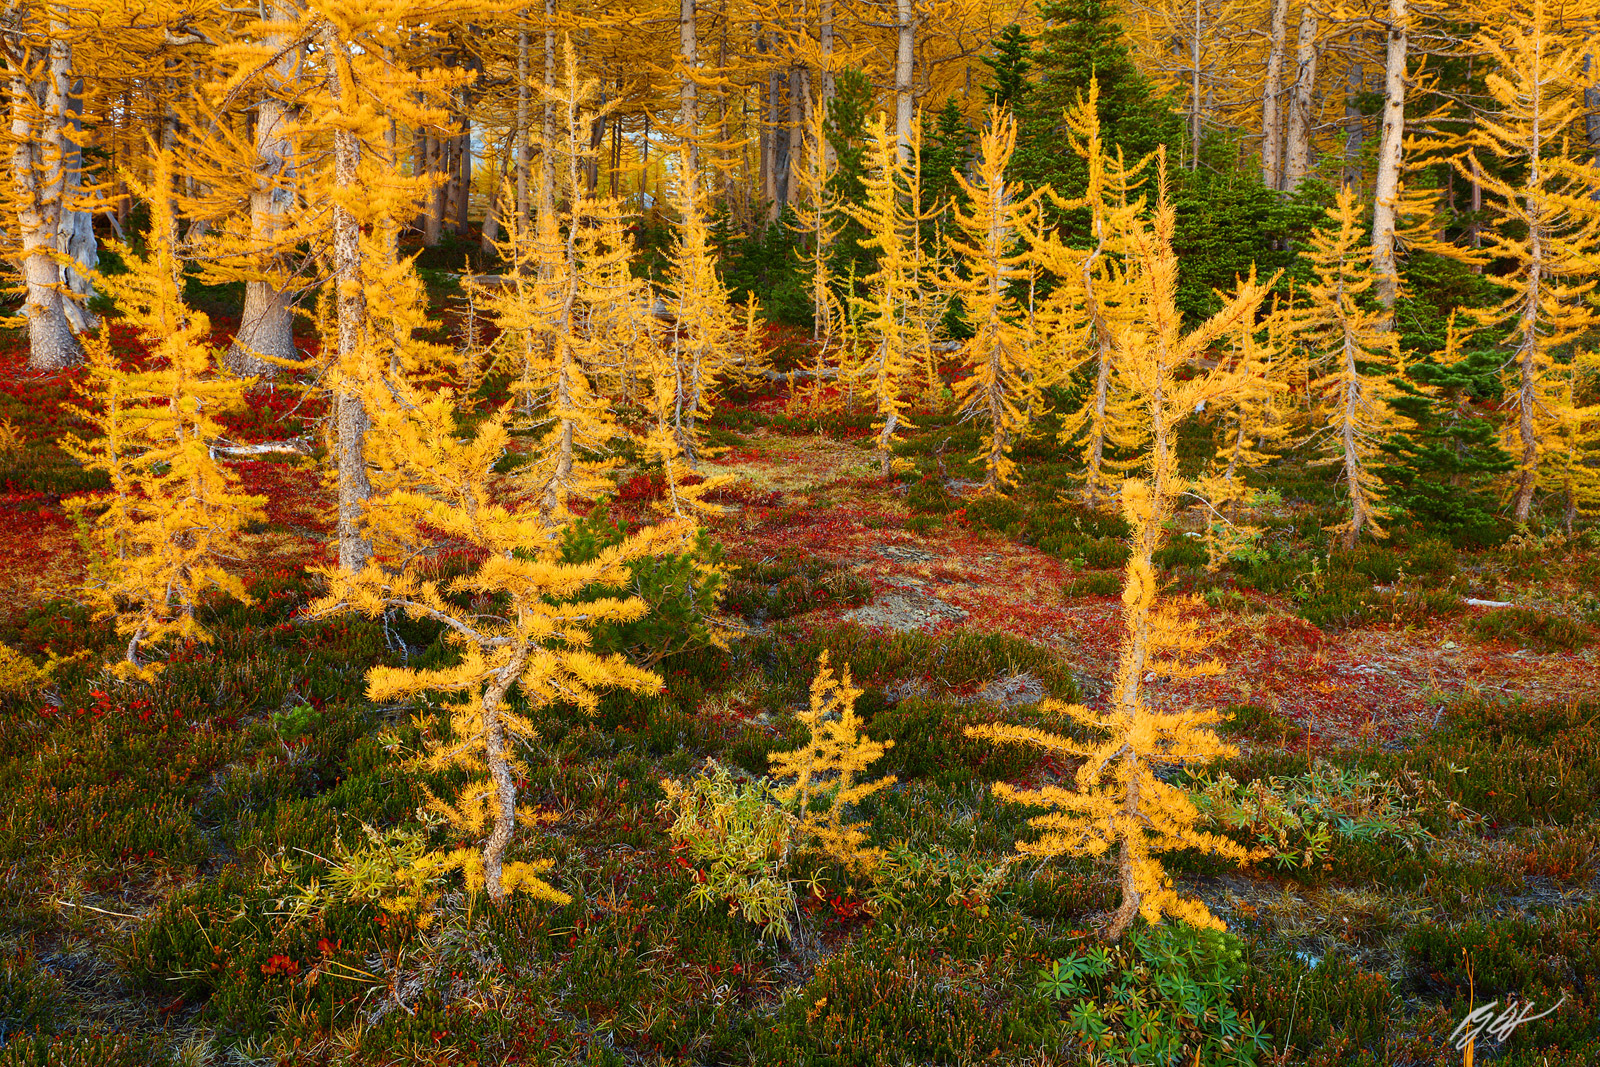 Golden Larch in the Enchantments in the Alpine Lake Wilderness in Washington